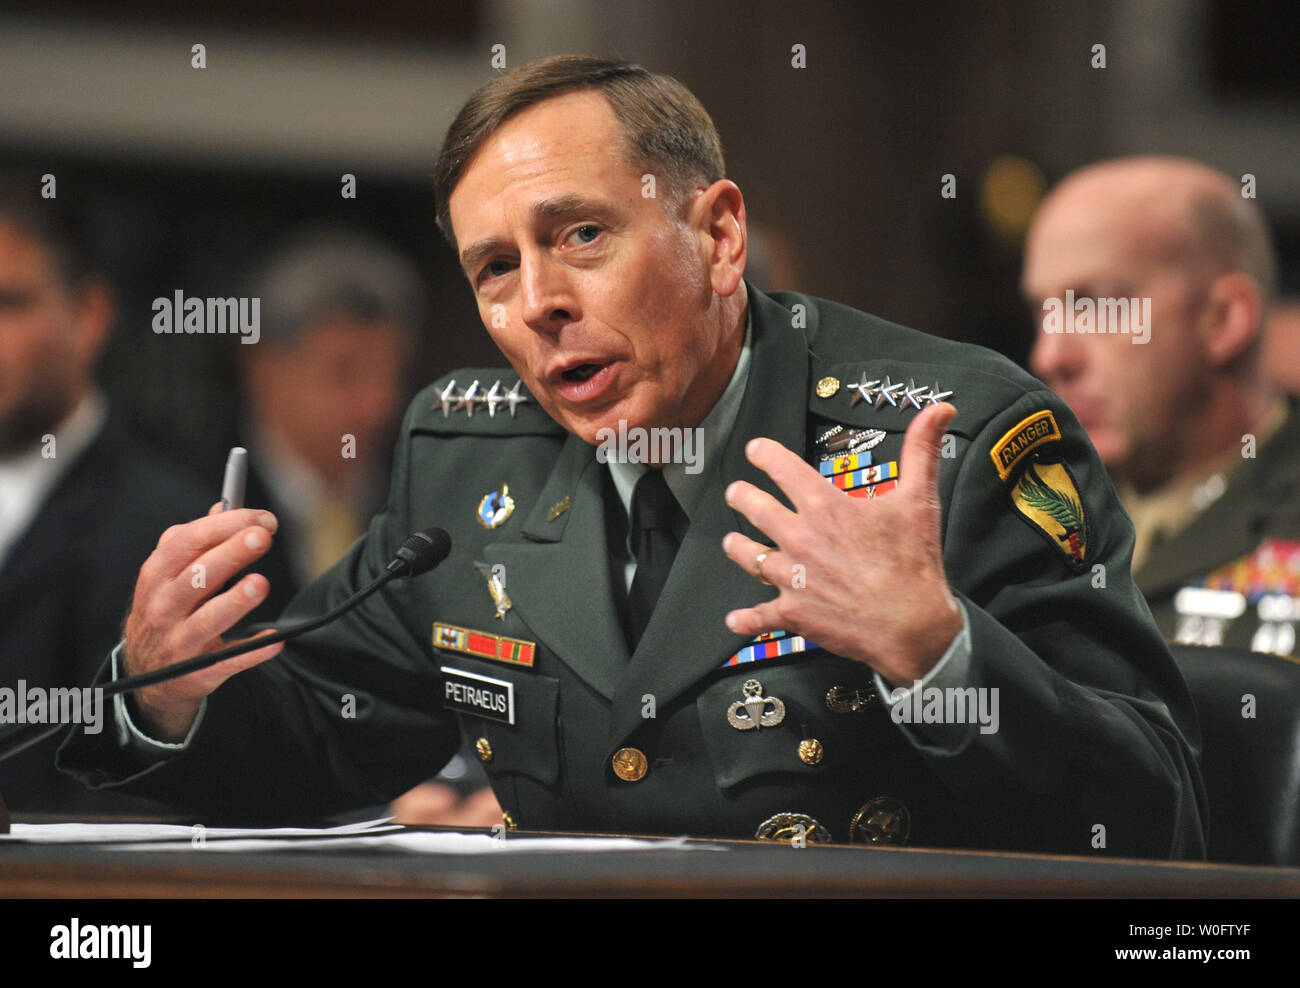 Gen. David Petraeus testifies during his confirmation hearing before the Senate Armed Services Committee to be reapportioned as commander of the International Security Assistance Force and U.S. Forces Afghanistan, on Capitol Hill in Washington on June 29, 2010.   UPI/Kevin Dietsch Stock Photo